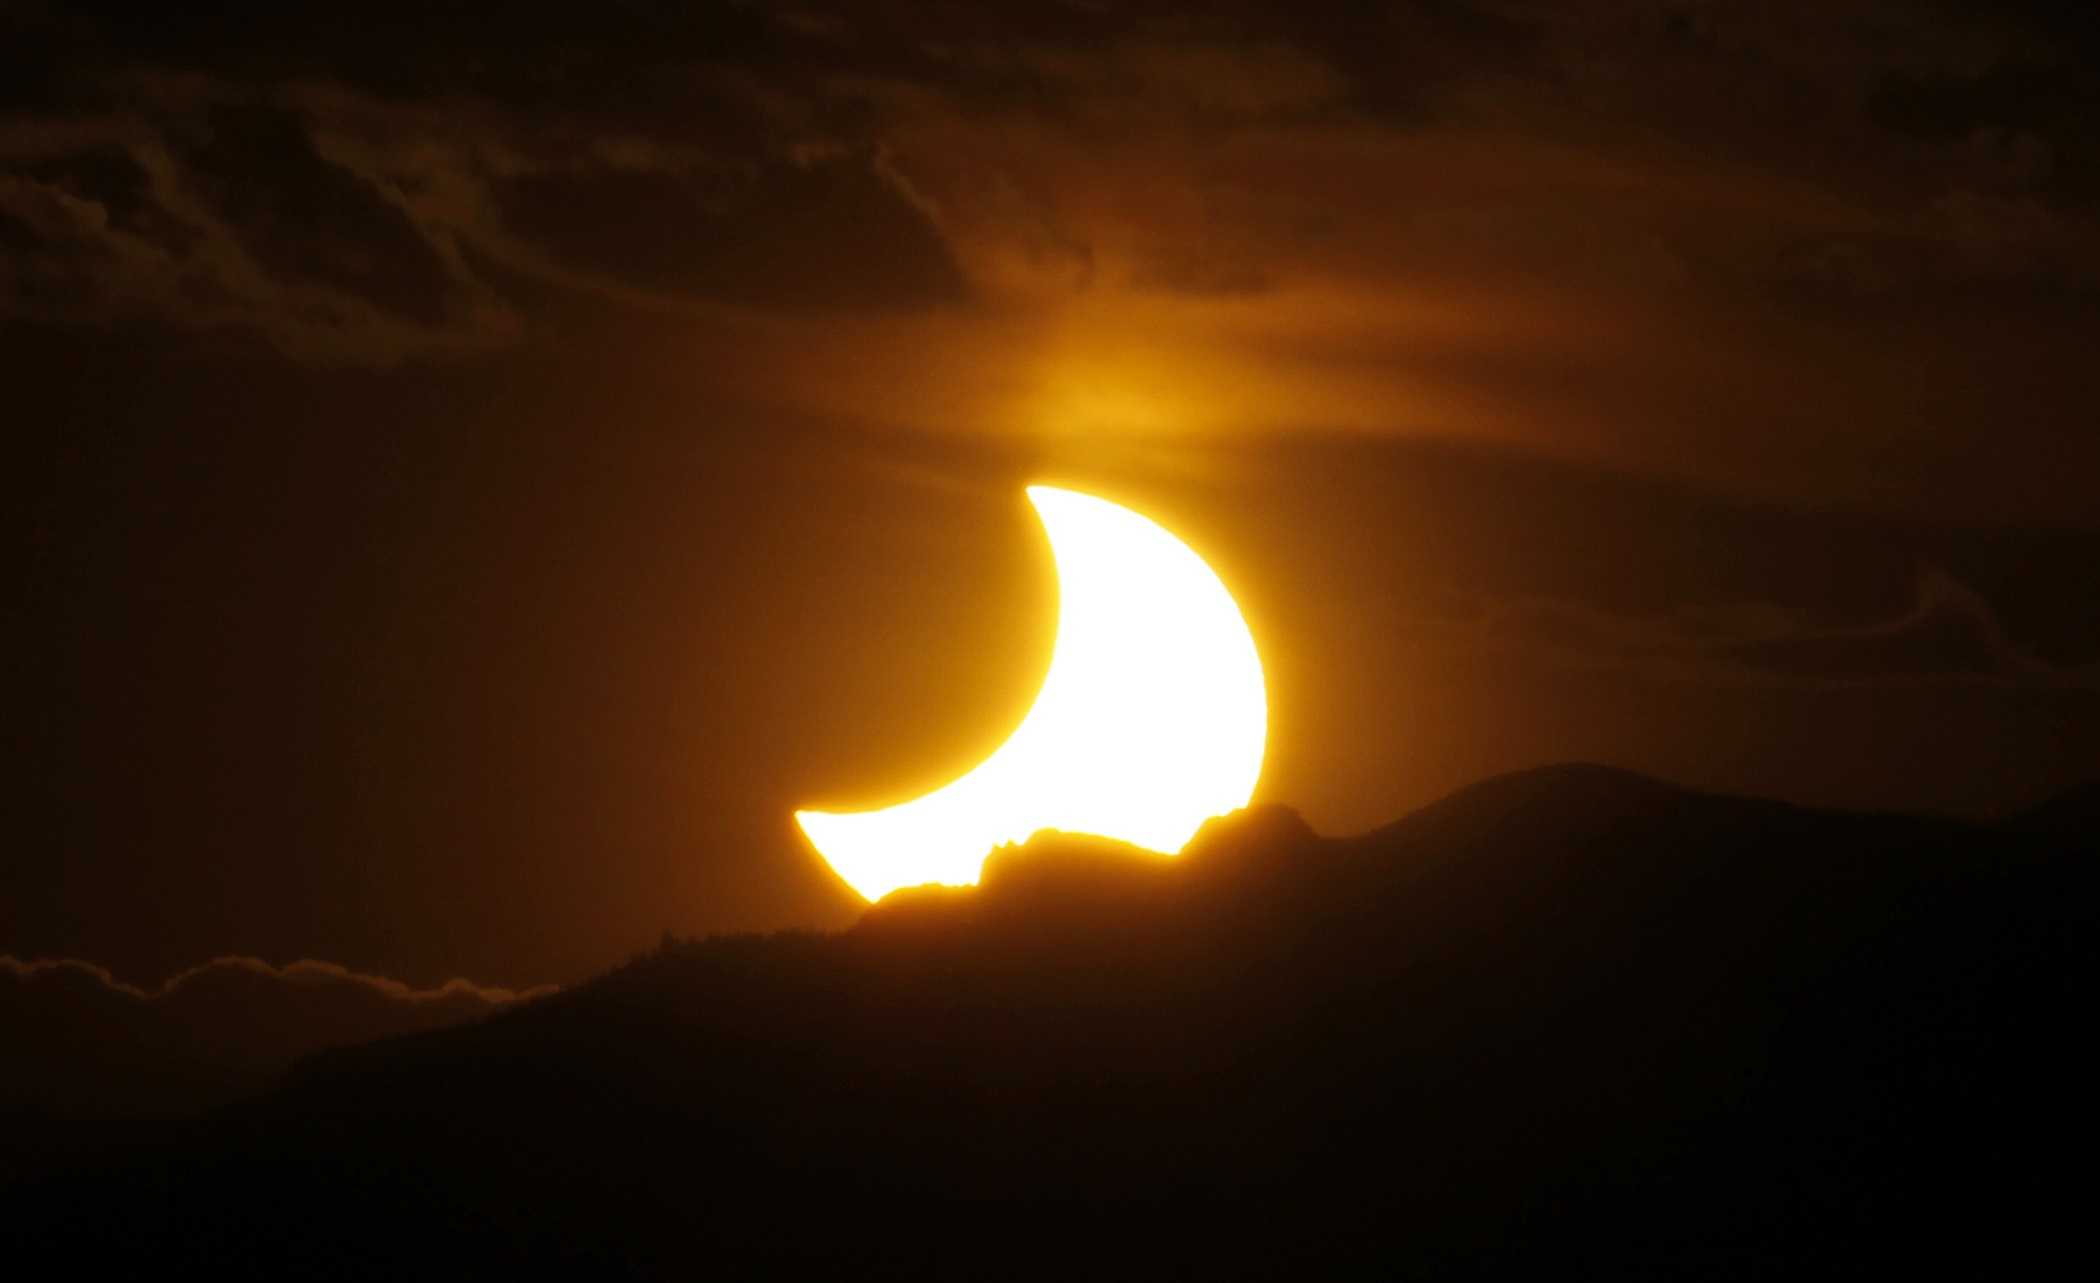 Here's how staring at the eclipse can burn eyes